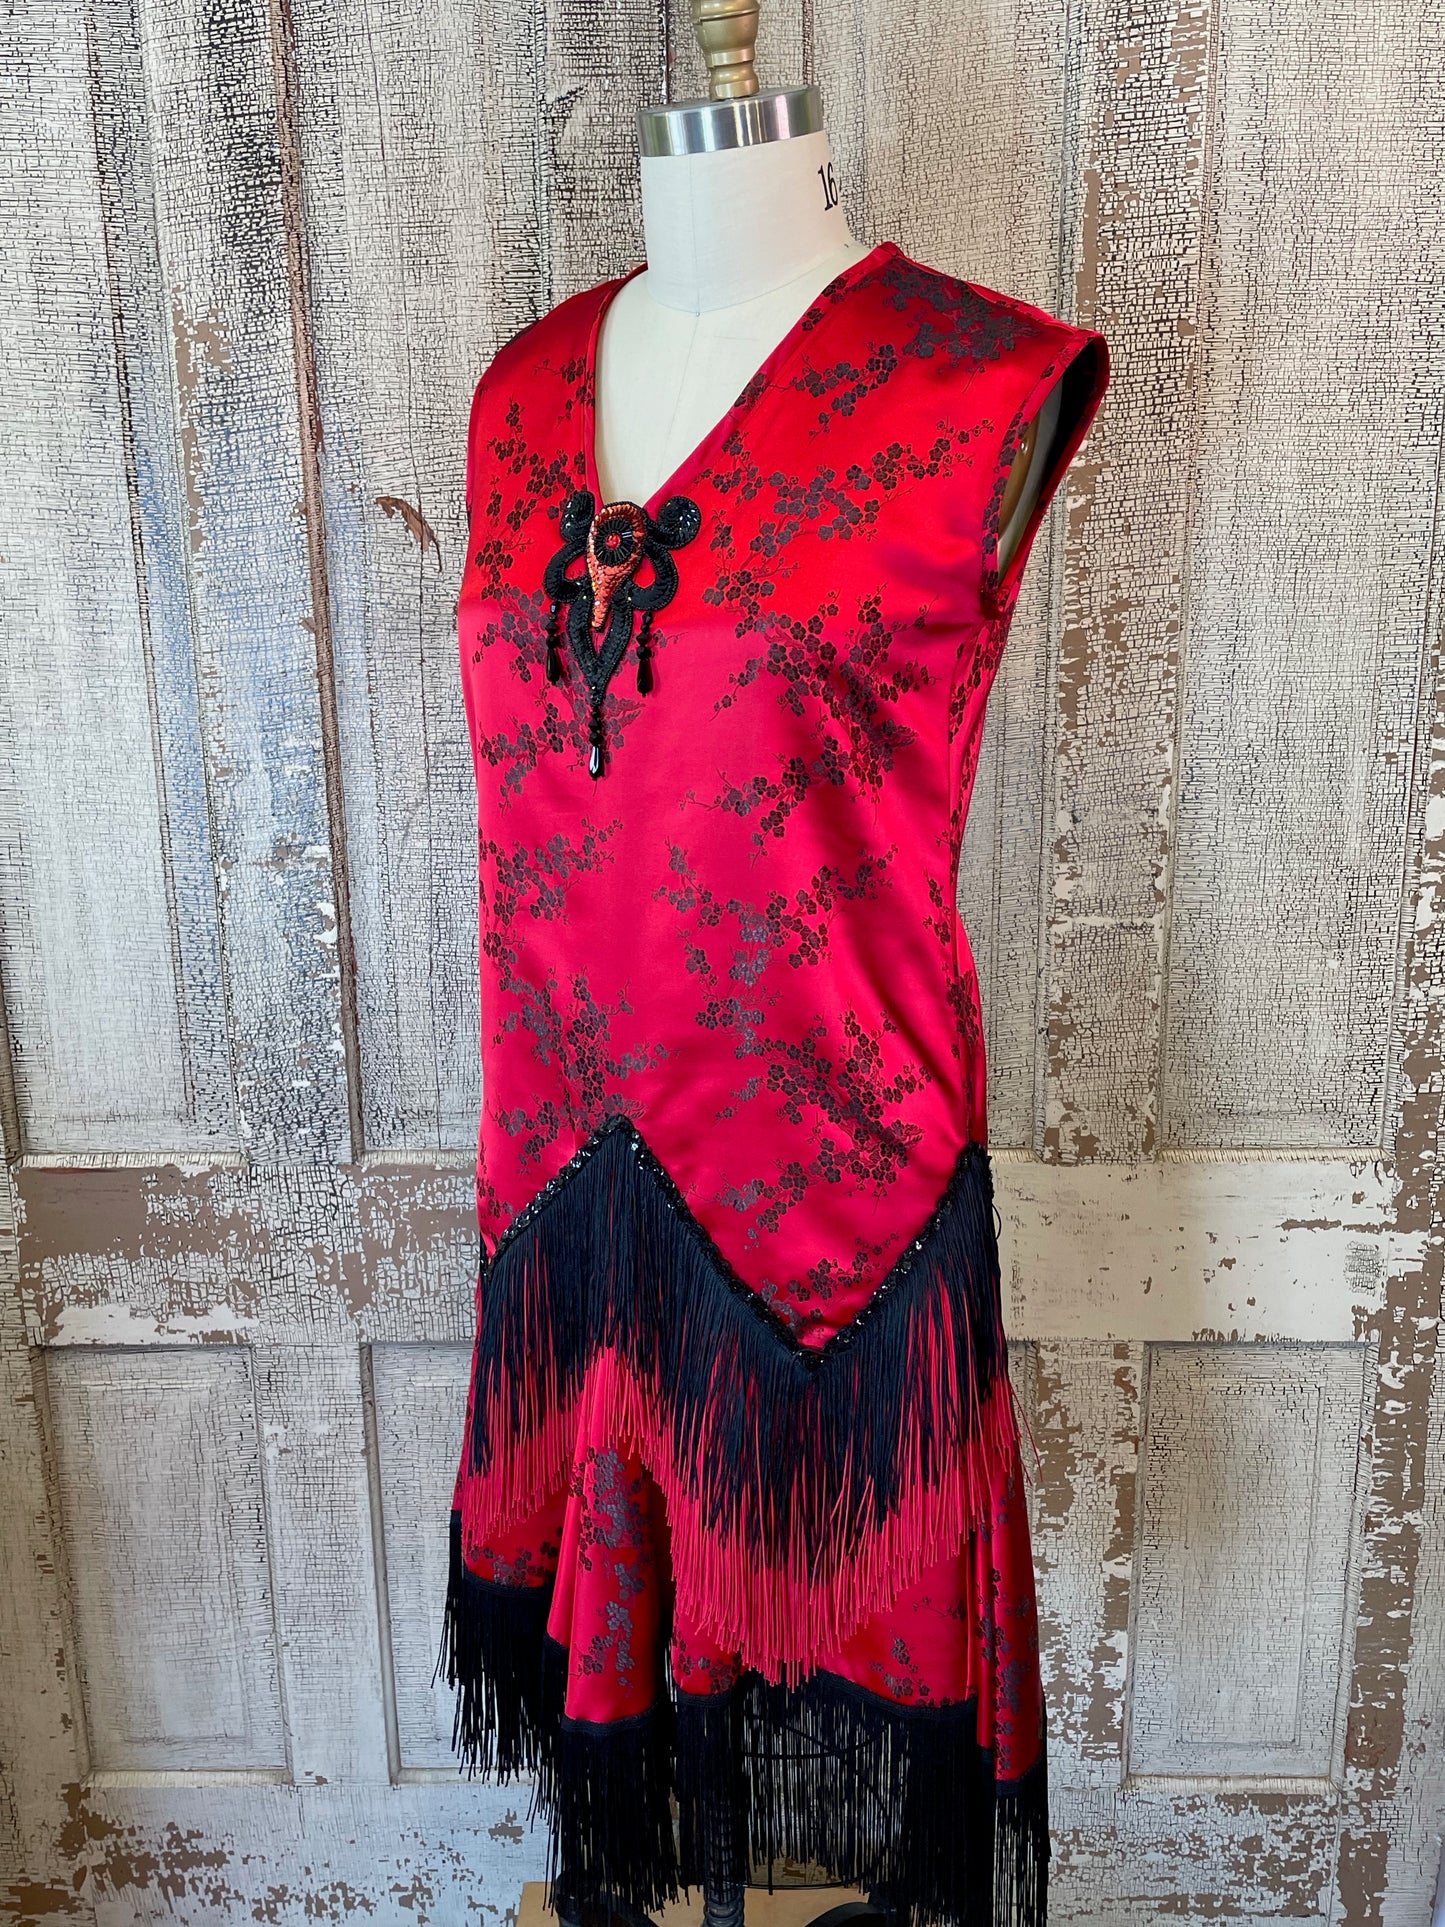 Red and Black Fringed Brocade "Flapper" Dress